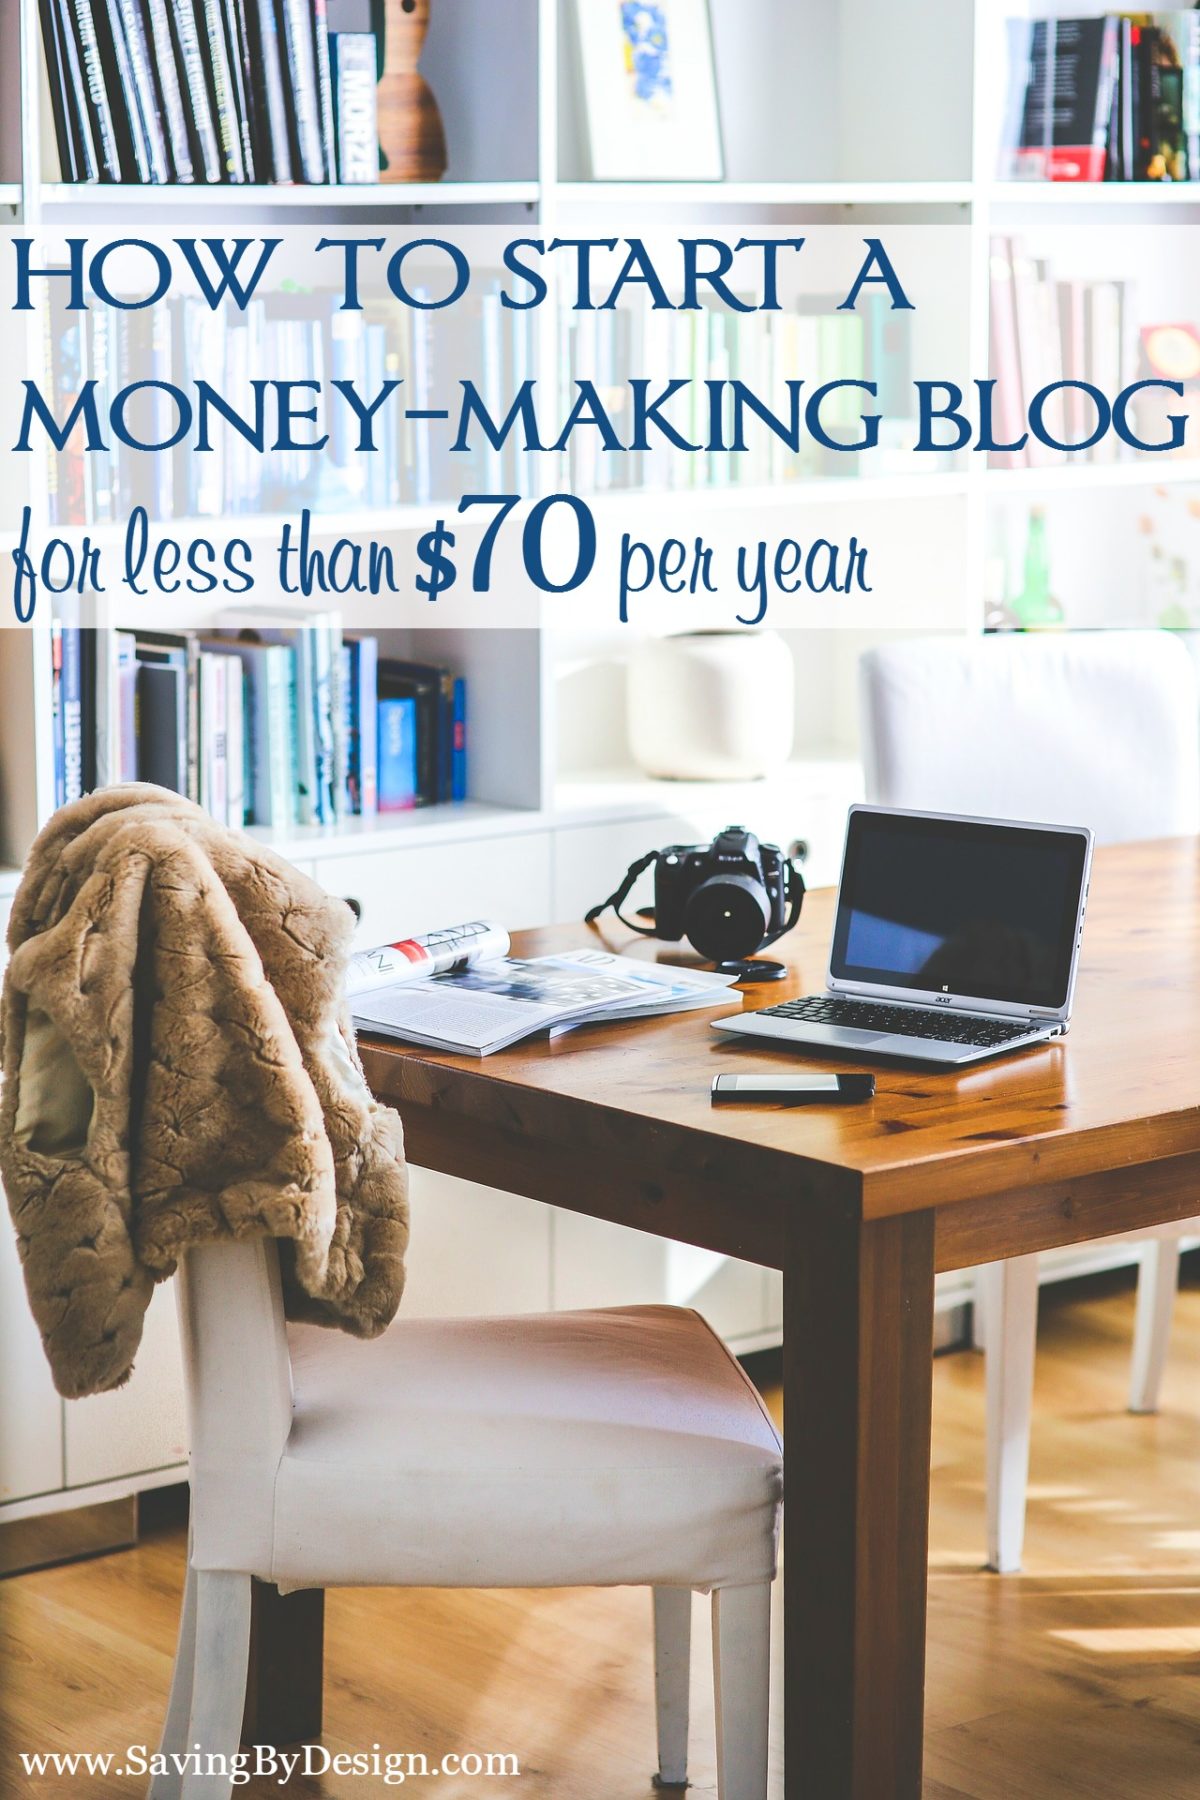 Starting a blog has made my dream of being a work-at-home mom come true. Here's how to start a money-making blog for less than $70 per year so you can achieve your dreams too!